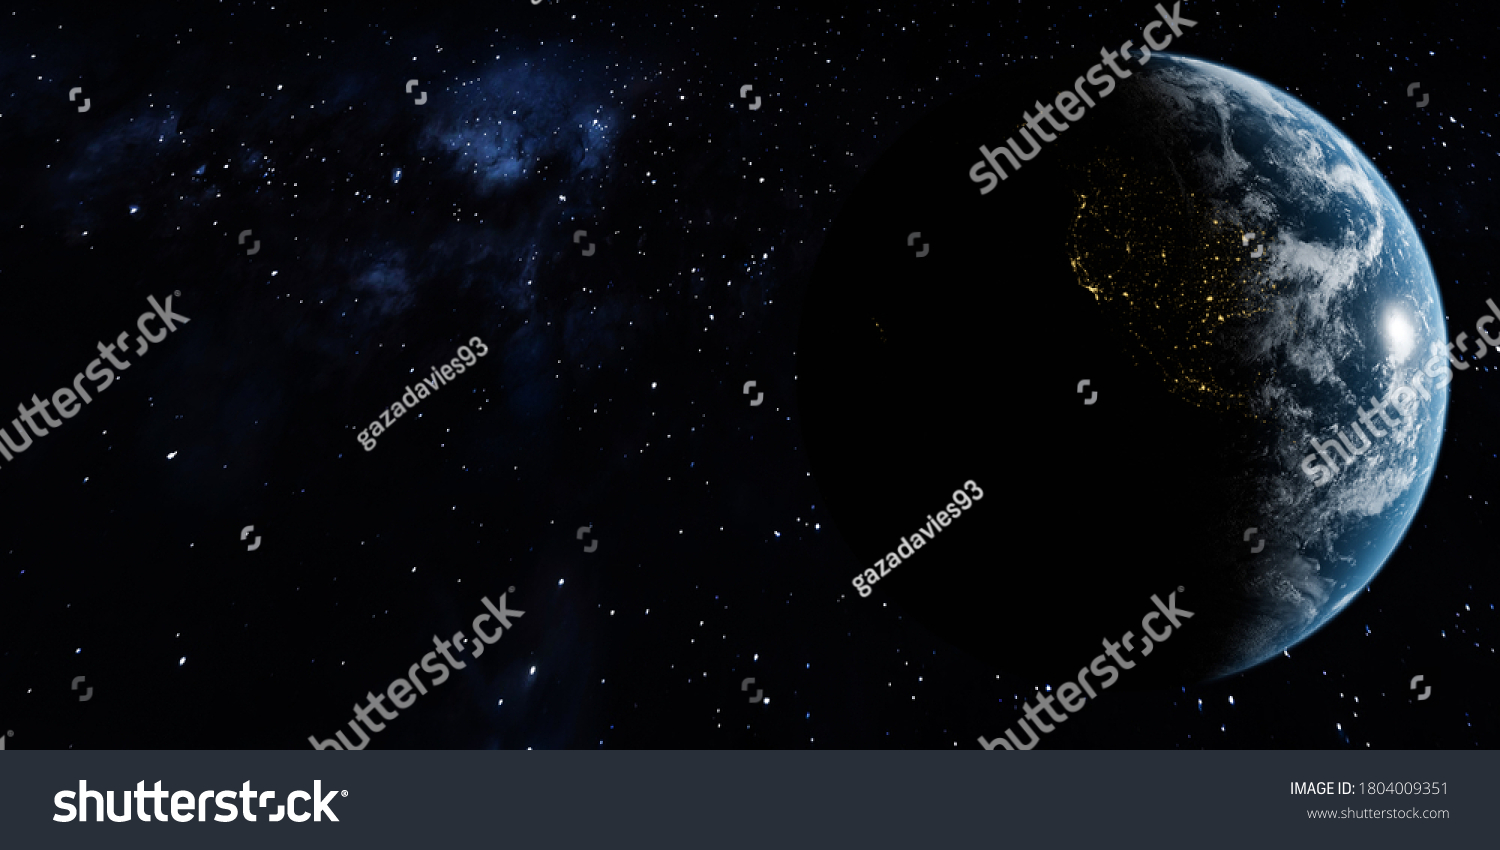 Earth globe on the galaxy background. Elements of this image furnished by NASA. Space art. Astronomy and science concept. Earth Hour and Earth Day event theme #1804009351